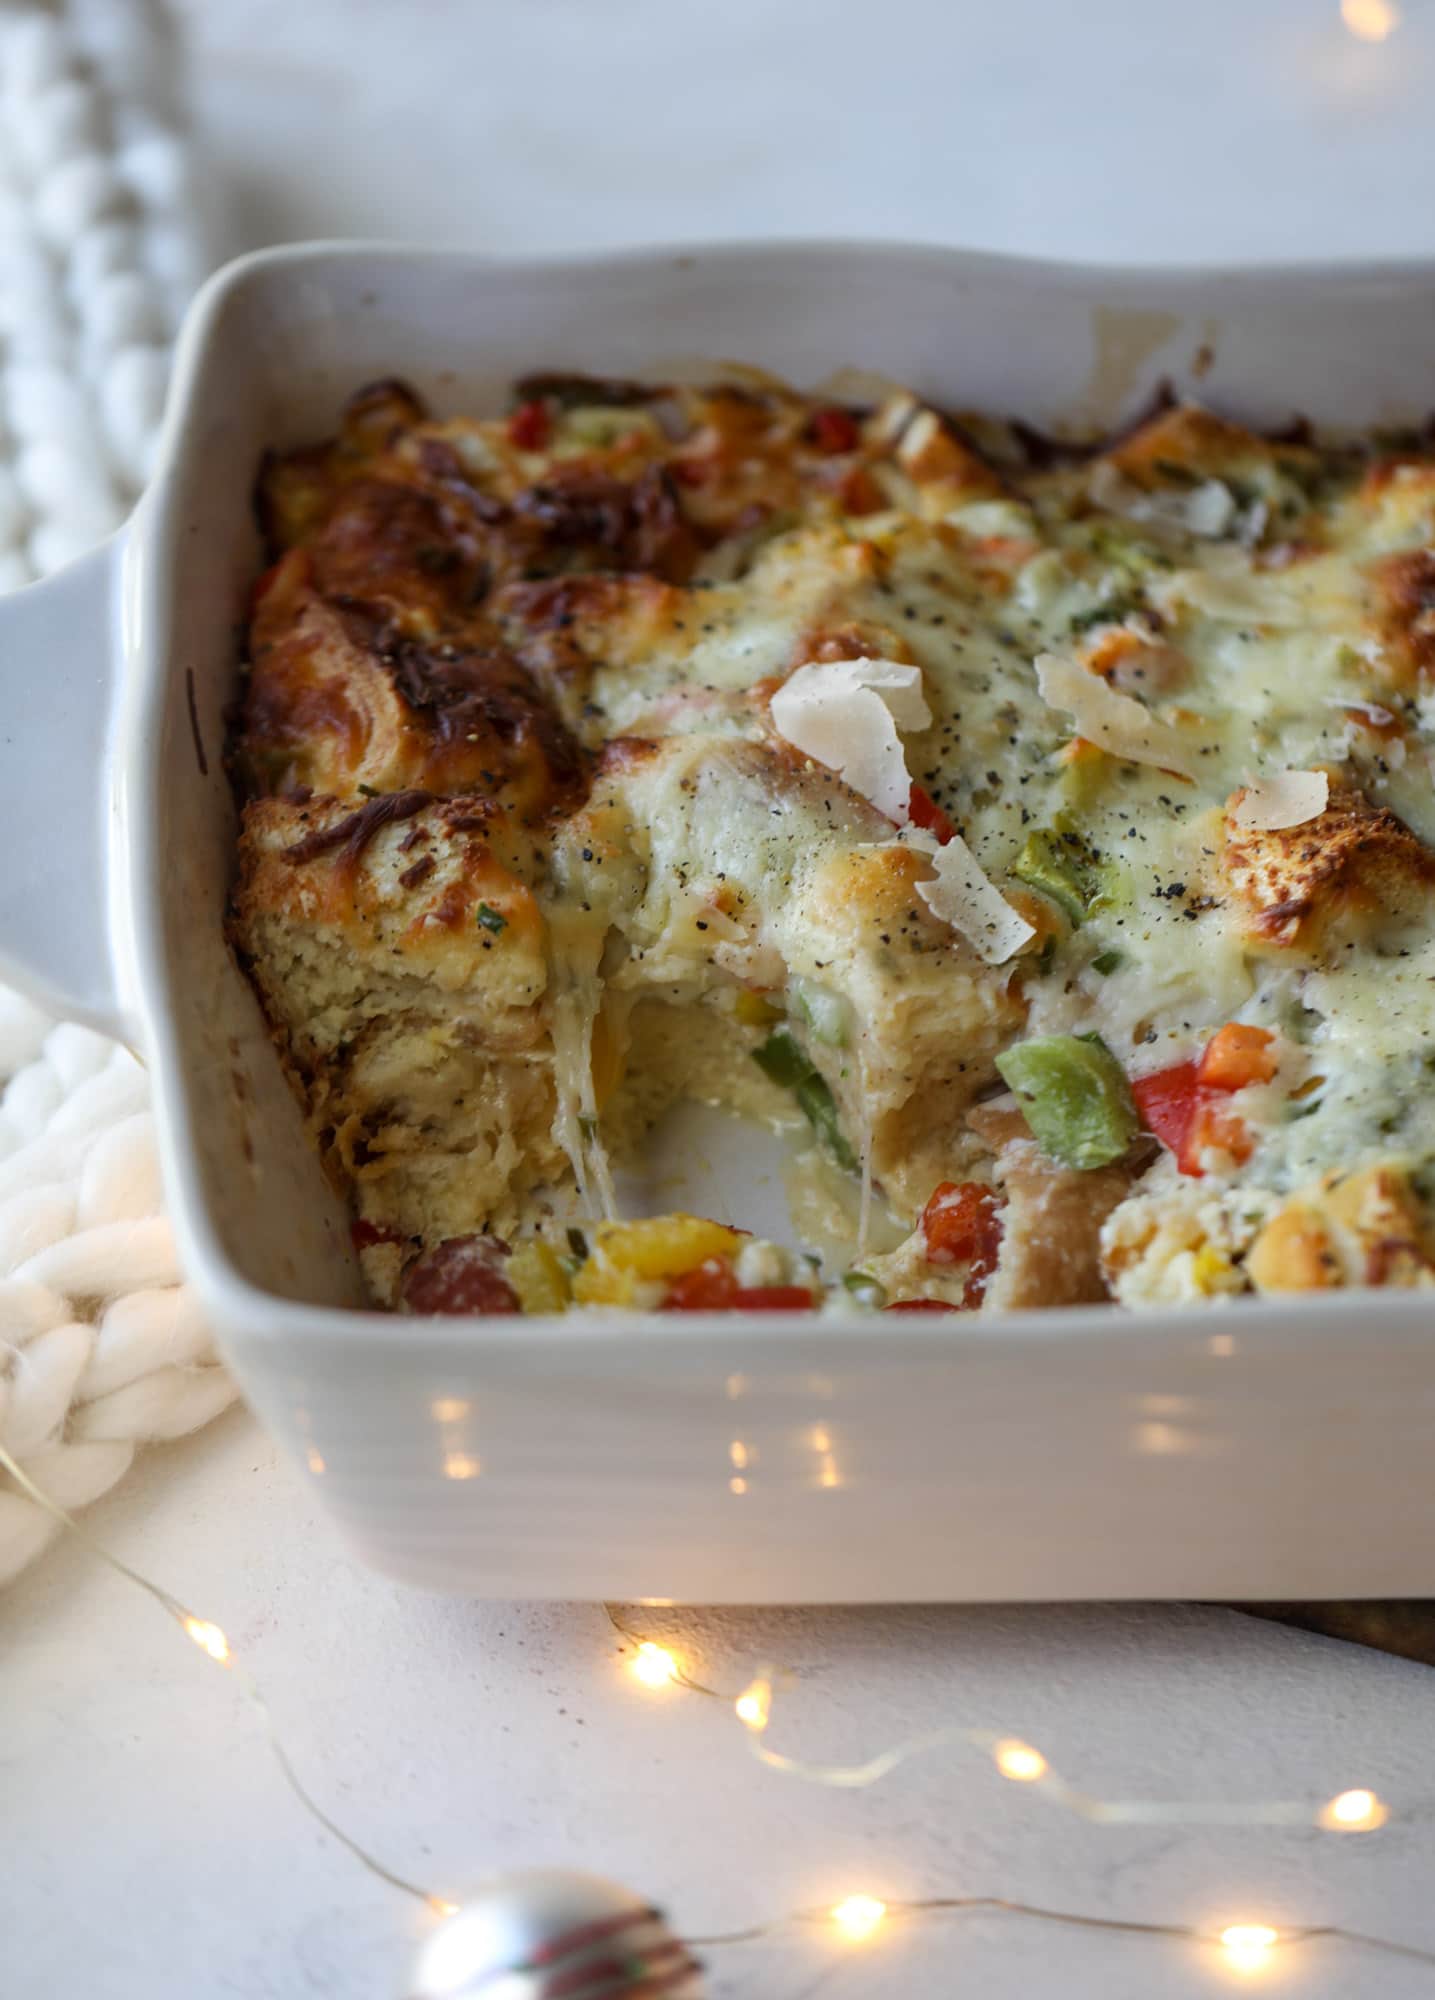 This breakfast strata is super special because the base is built on pepperoni rolls! This make ahead casserole is perfect for holiday brunches or parties and tastes like a supreme pizza. It's so easy to throw together too! I howsweeteats.com #breakfast #strata